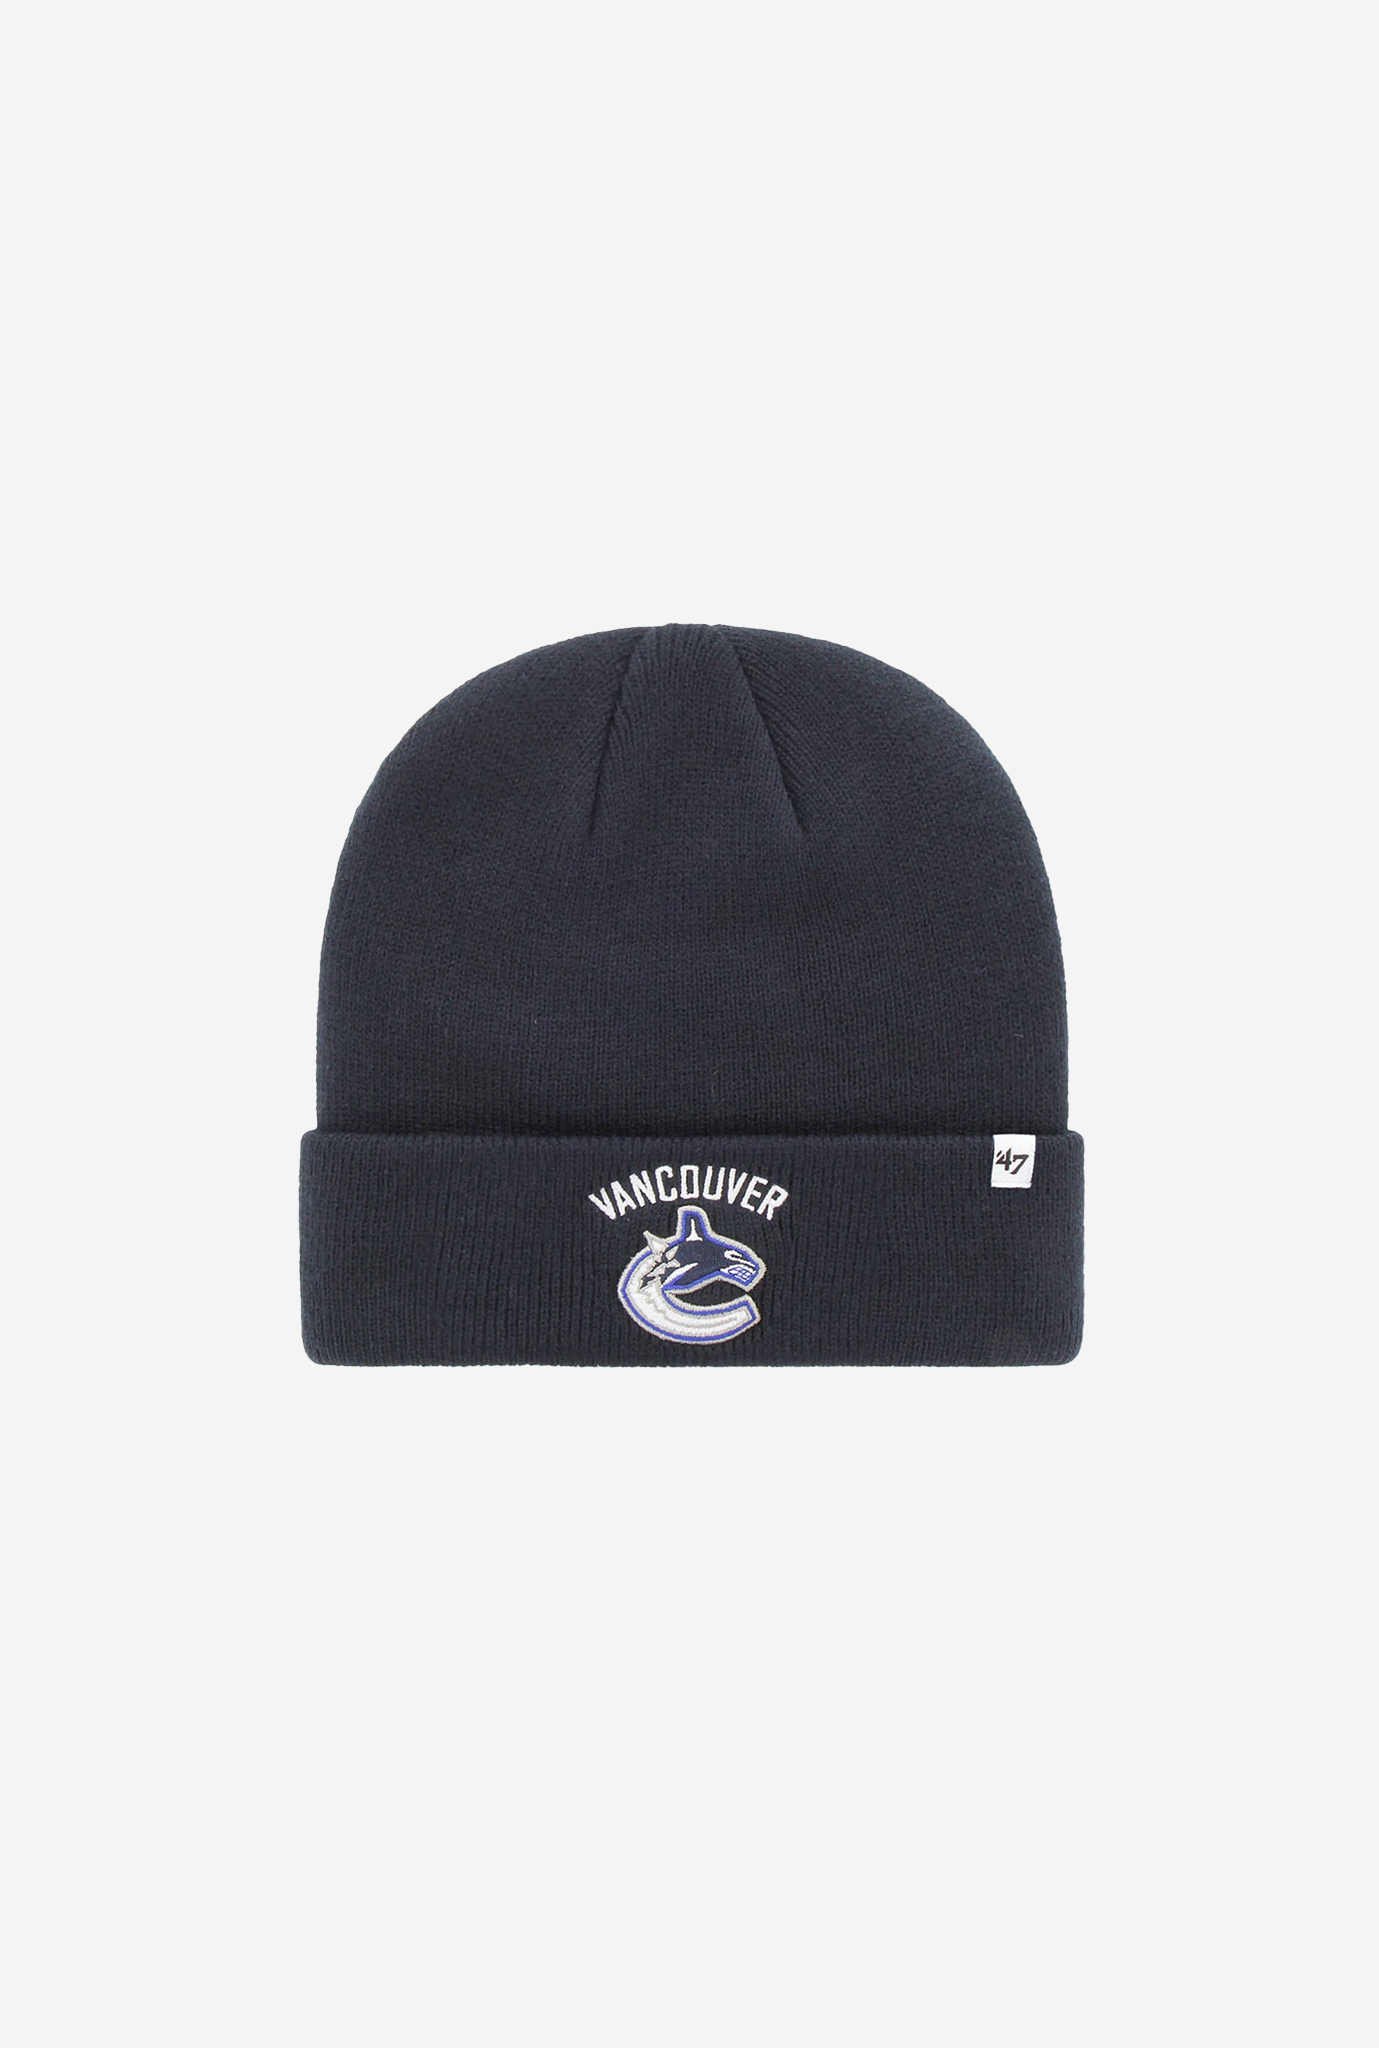 Vancouver Canucks Raised Cuff Knit Hat